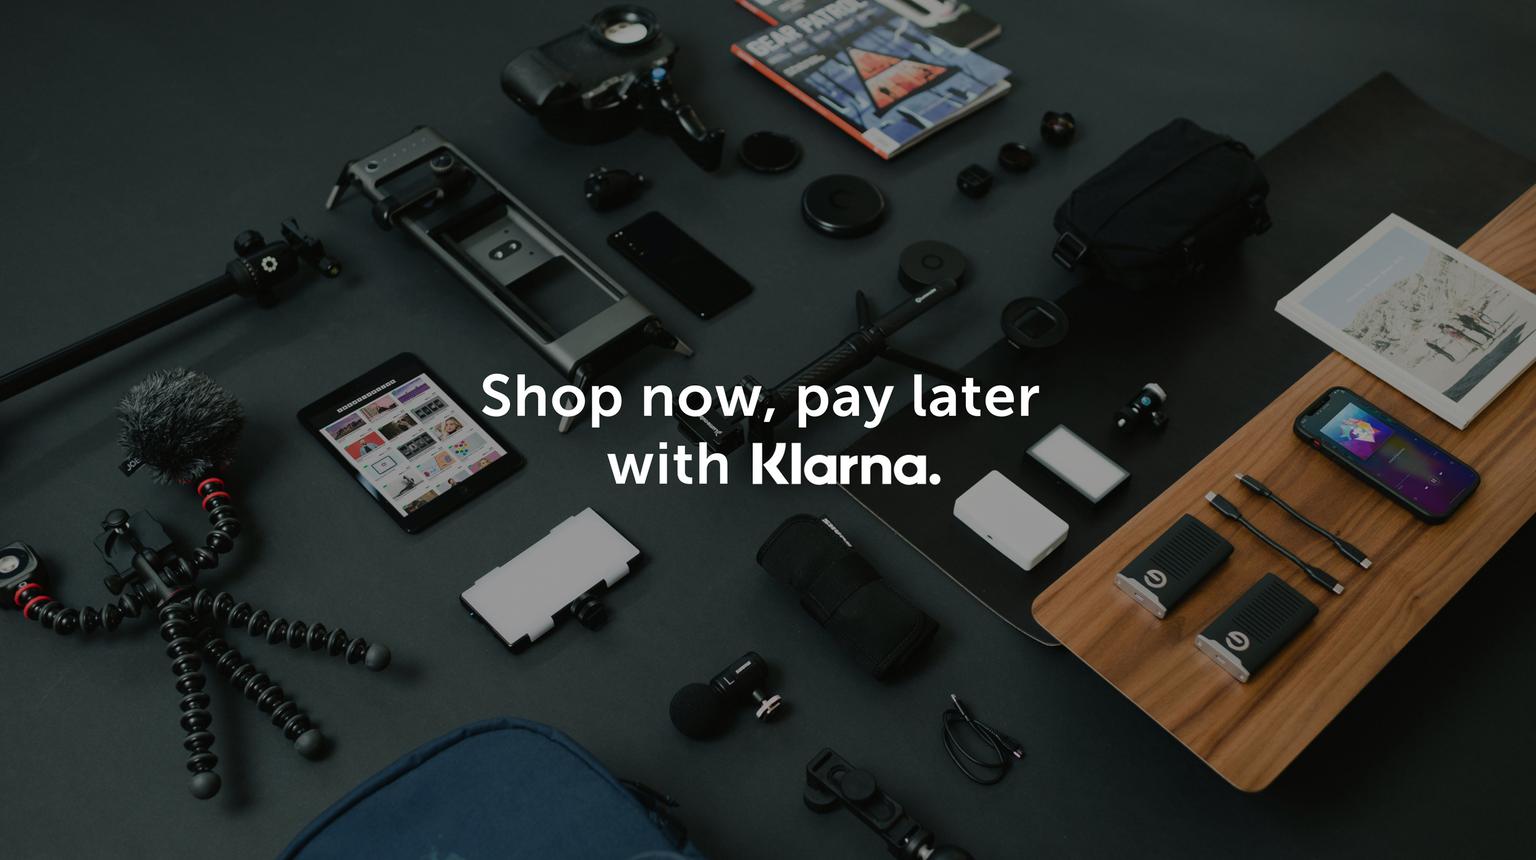 Flat lay of various gear for creatives with text, "Shop now, pay later with Klarna" on top.